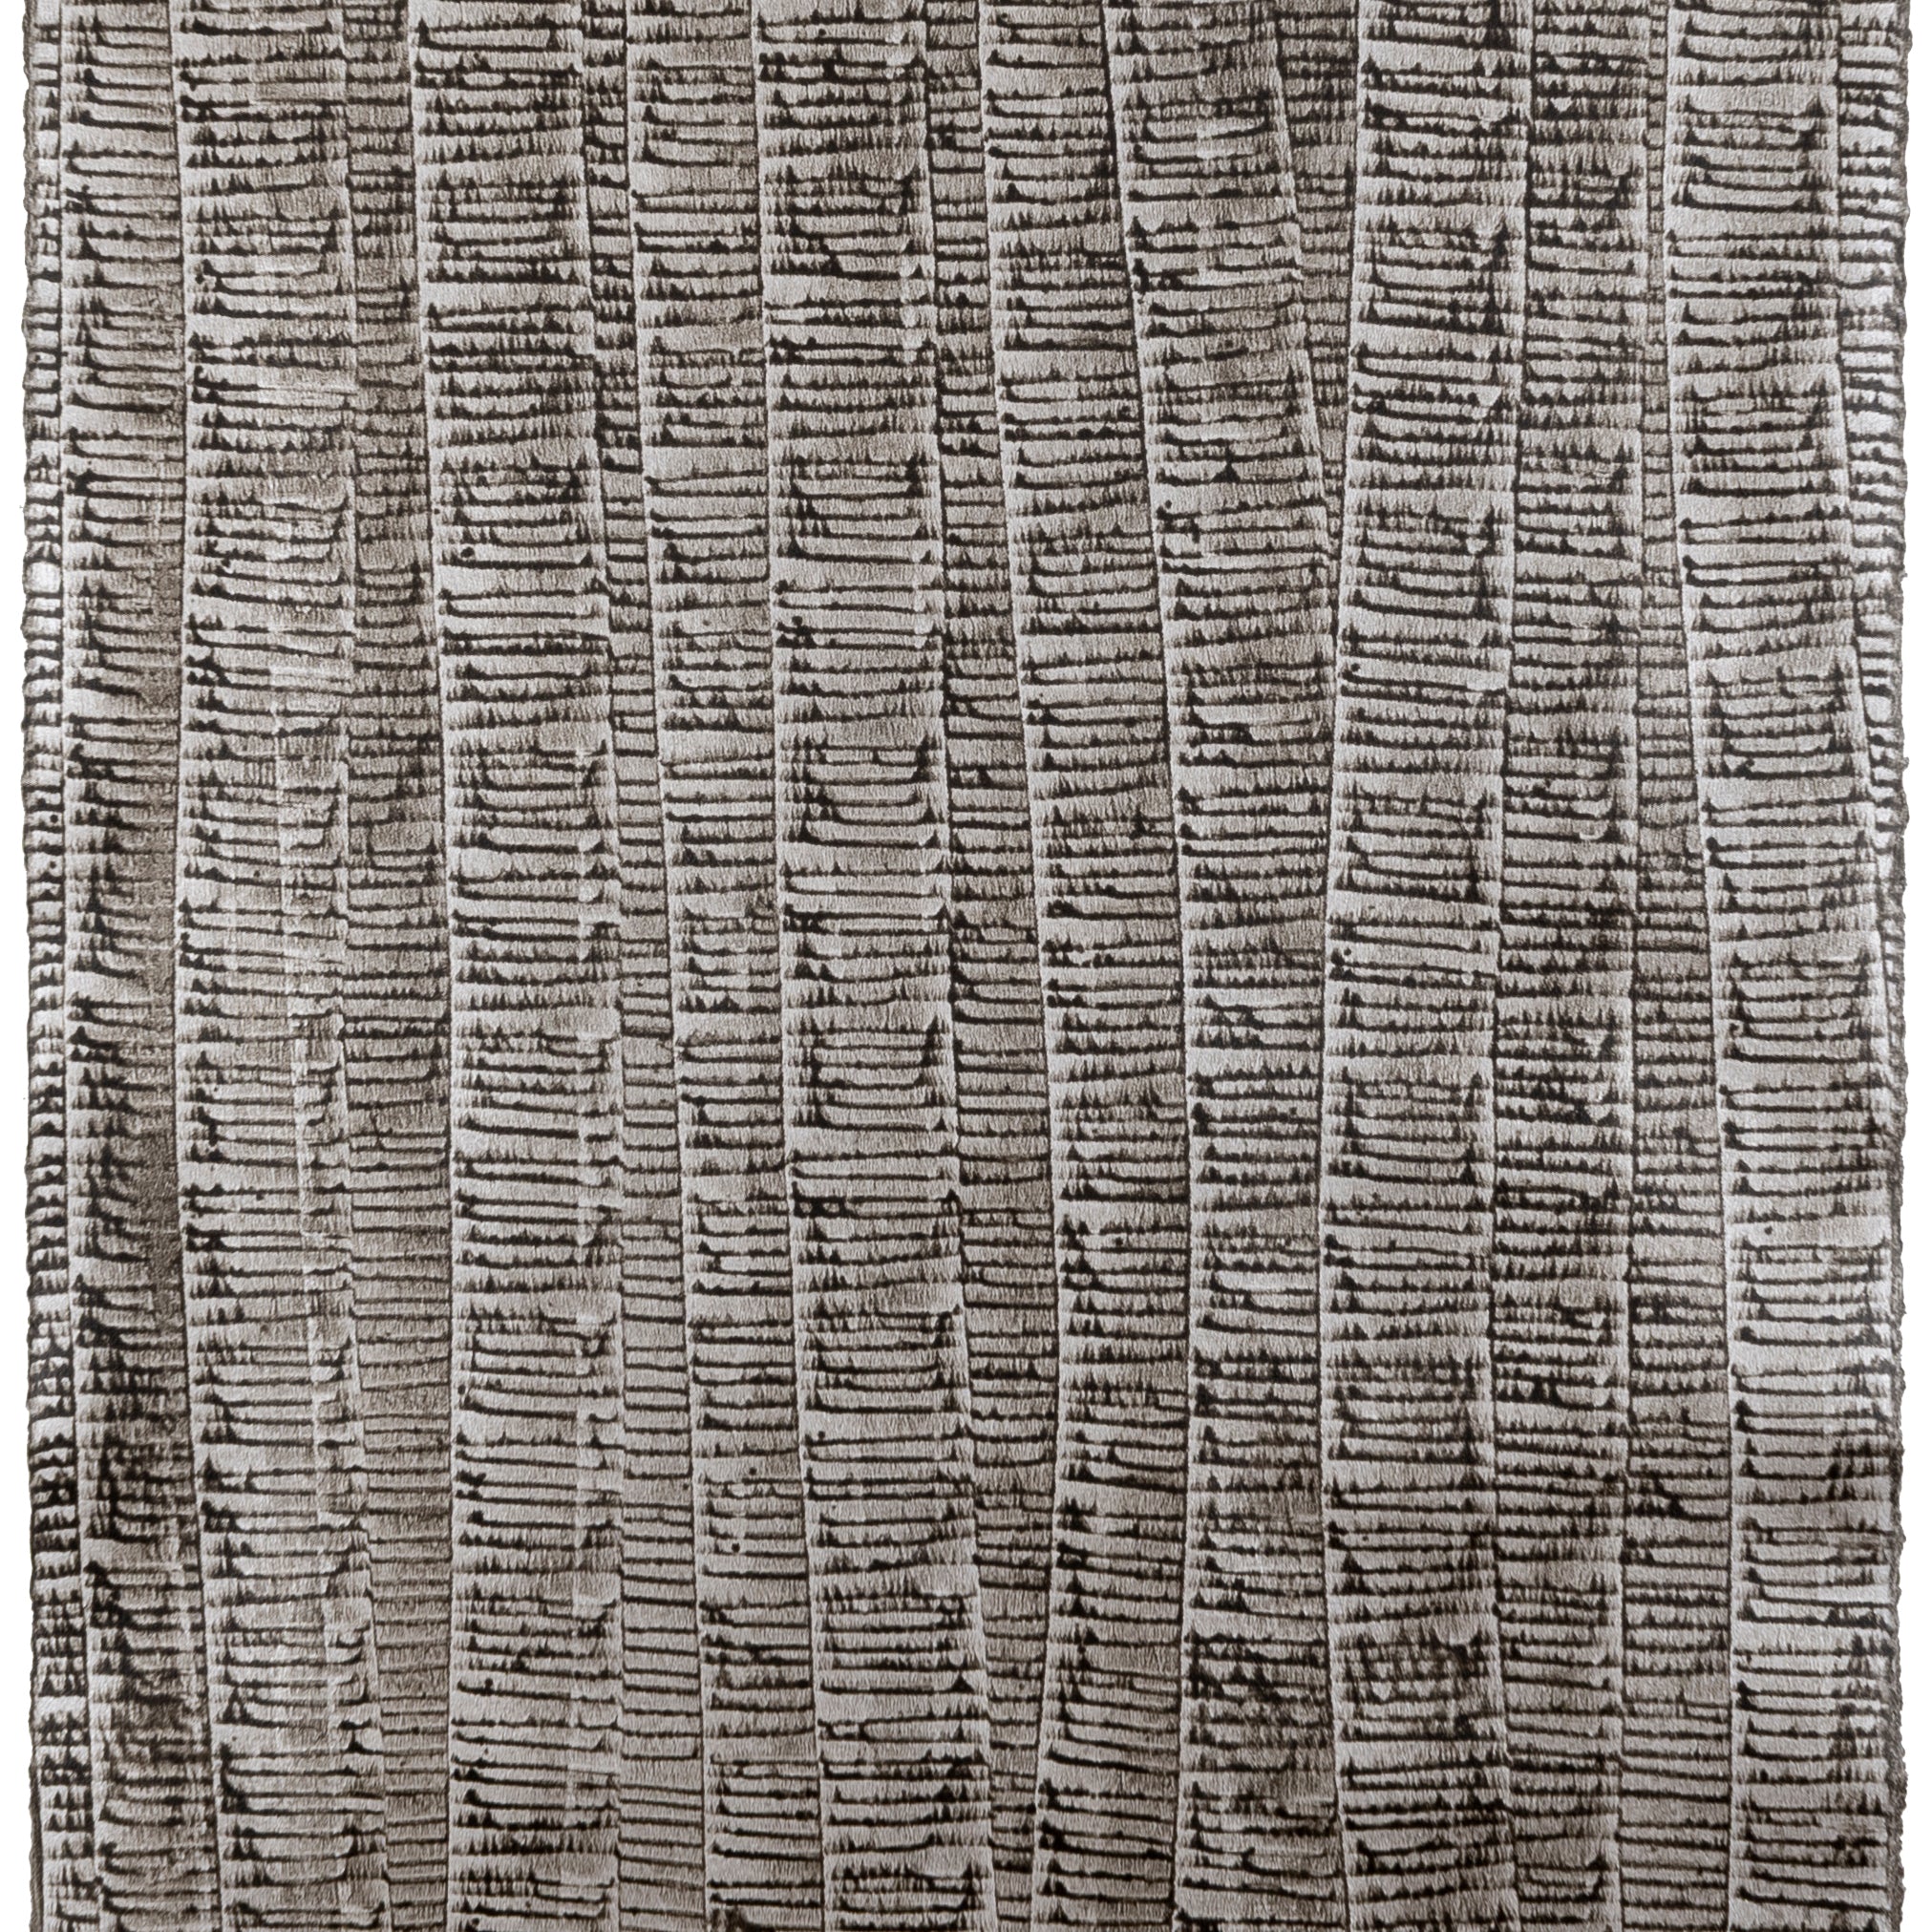 Sheet of hand-painted wallpaper with an undulating ribbon pattern in charcoal on a silver field.